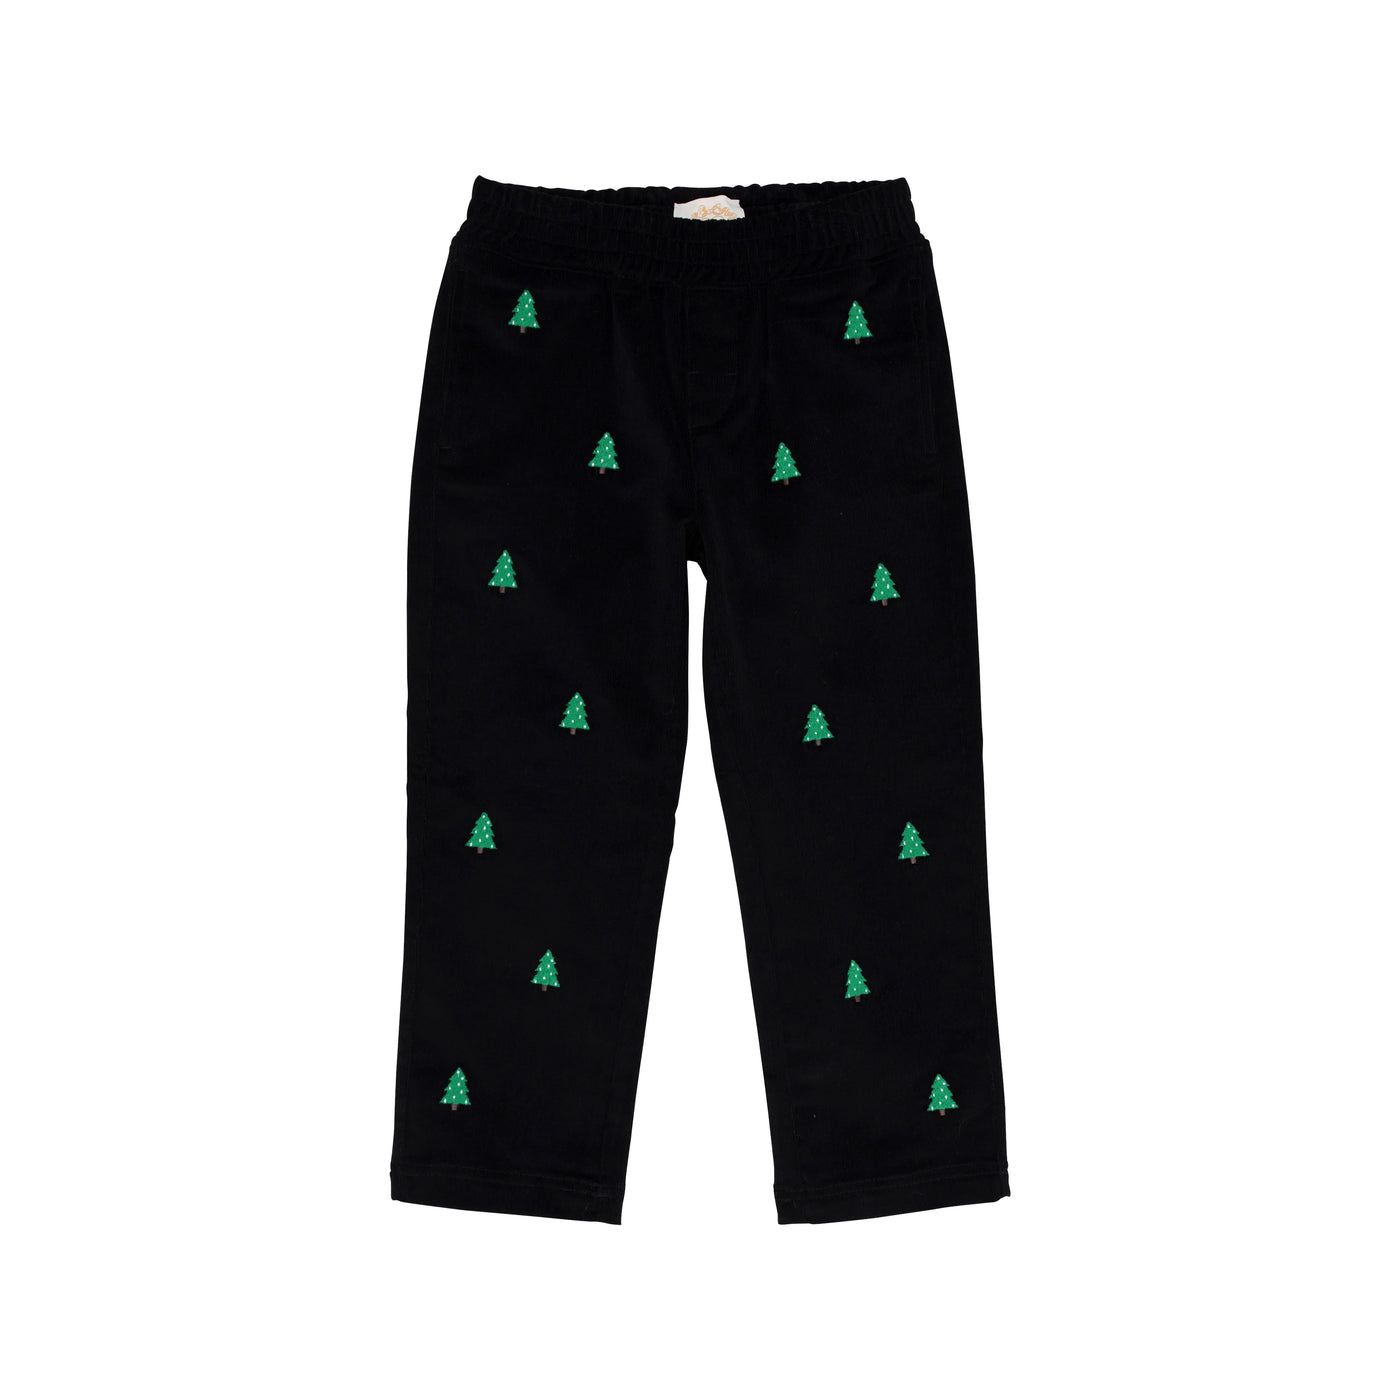 Critter Sheffield Pants (Corduroy) - Newport Night With Tree Embroidery